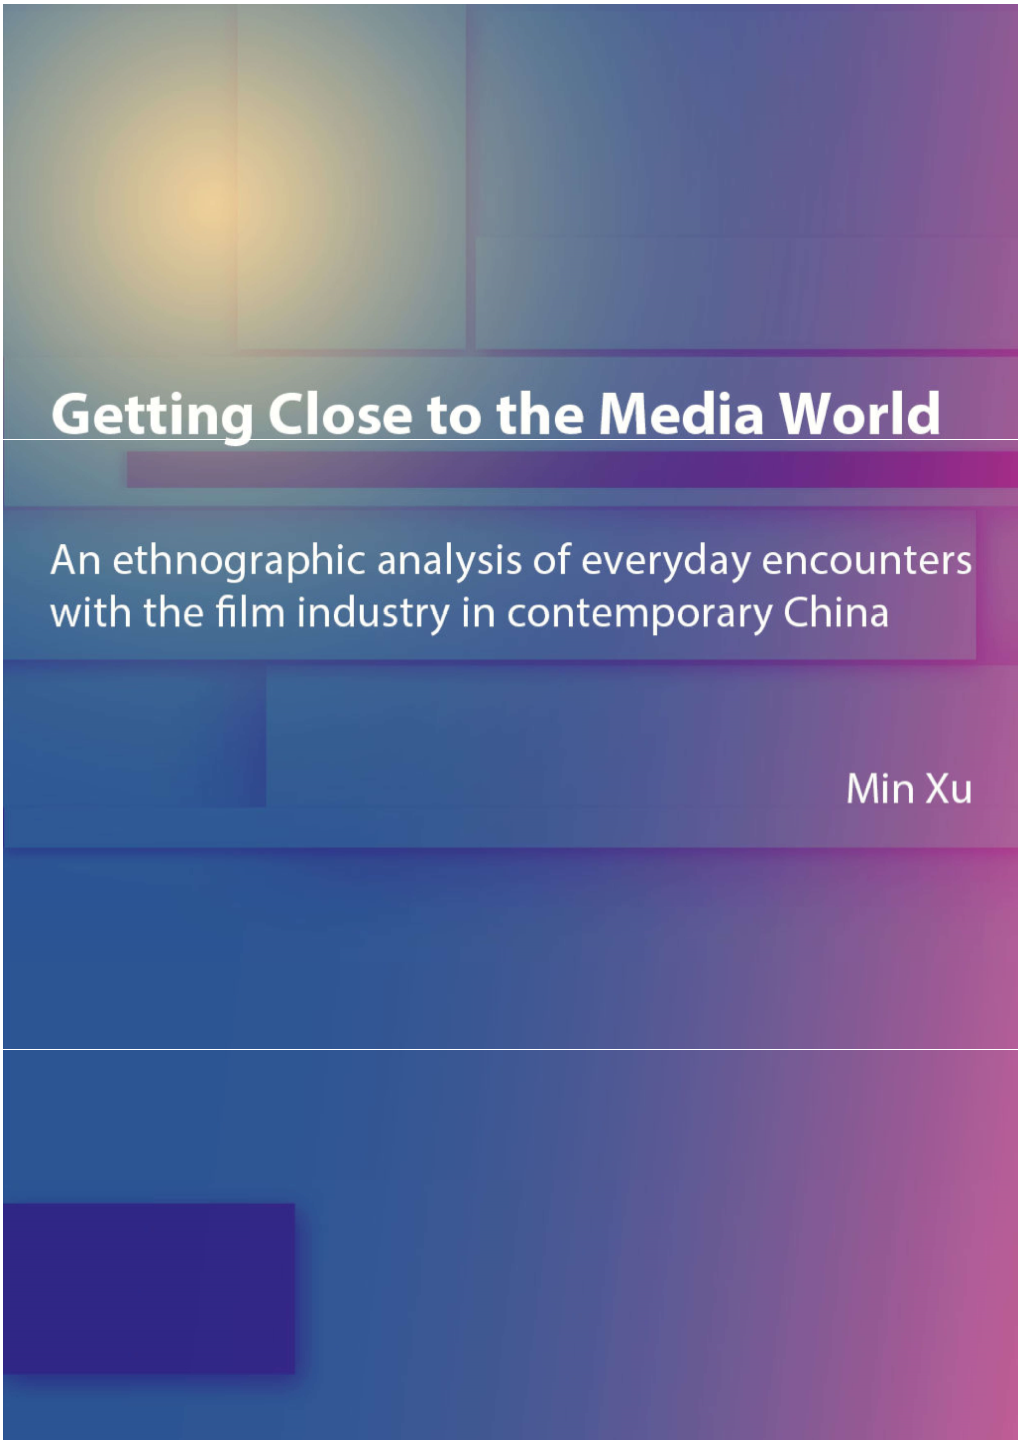 An Ethnographic Analysis of Everyday Encounters with the Film Industry in Contemporary China